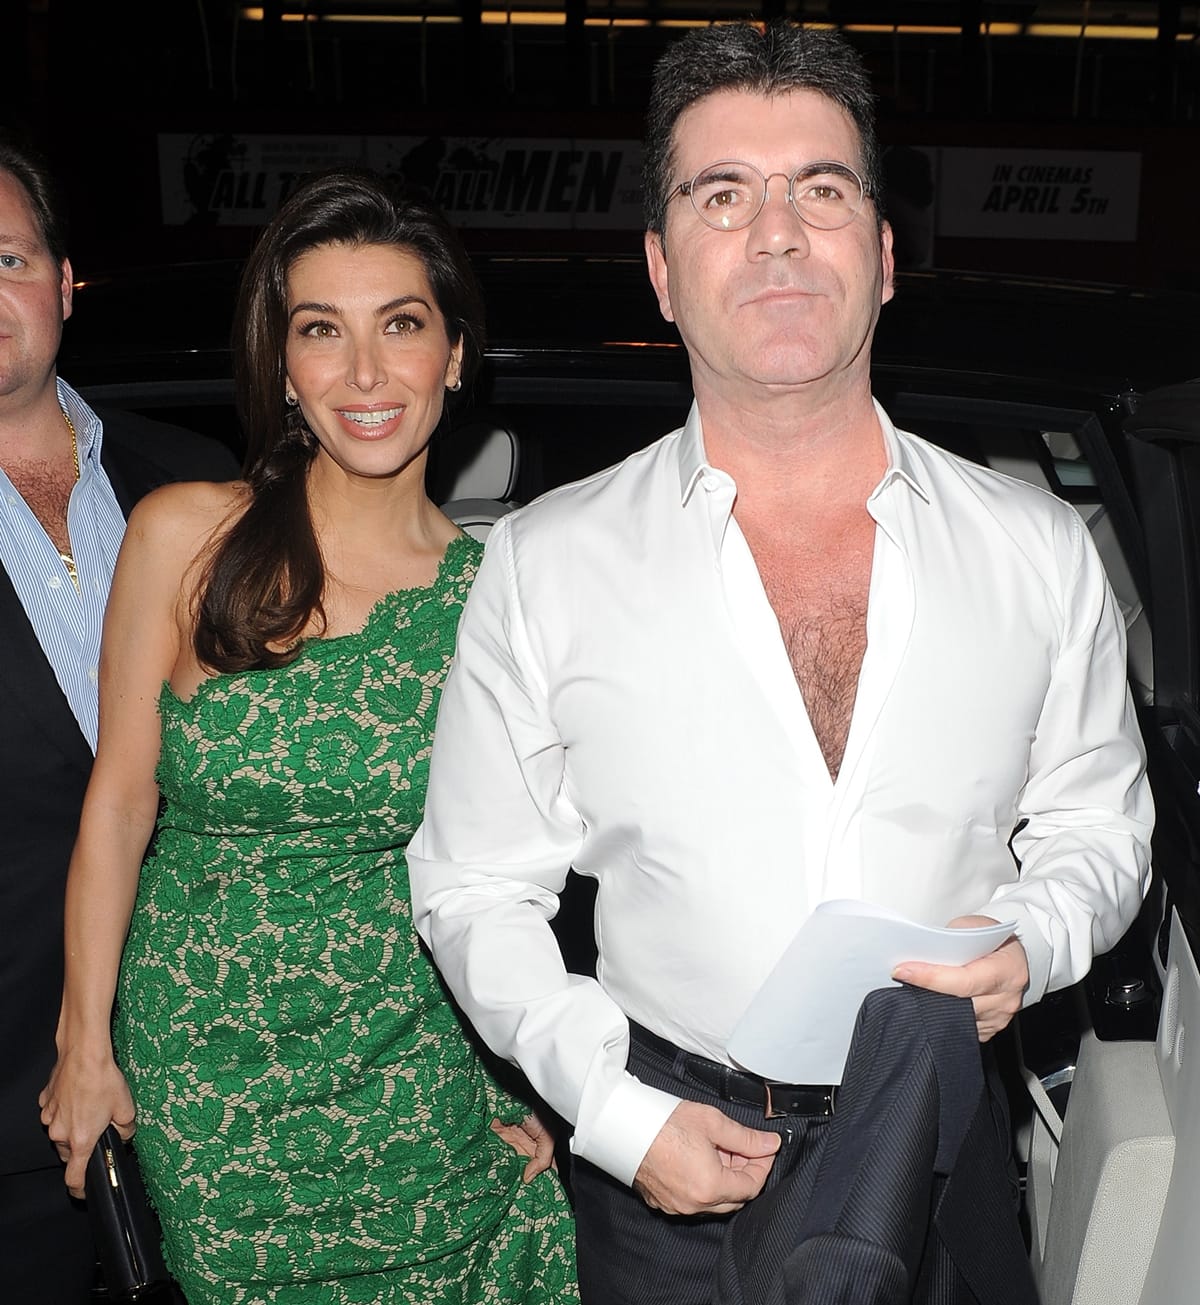 Makeup artist Mezhgan Hussainy and Simon Cowell met on American Idol and started dating in 2006